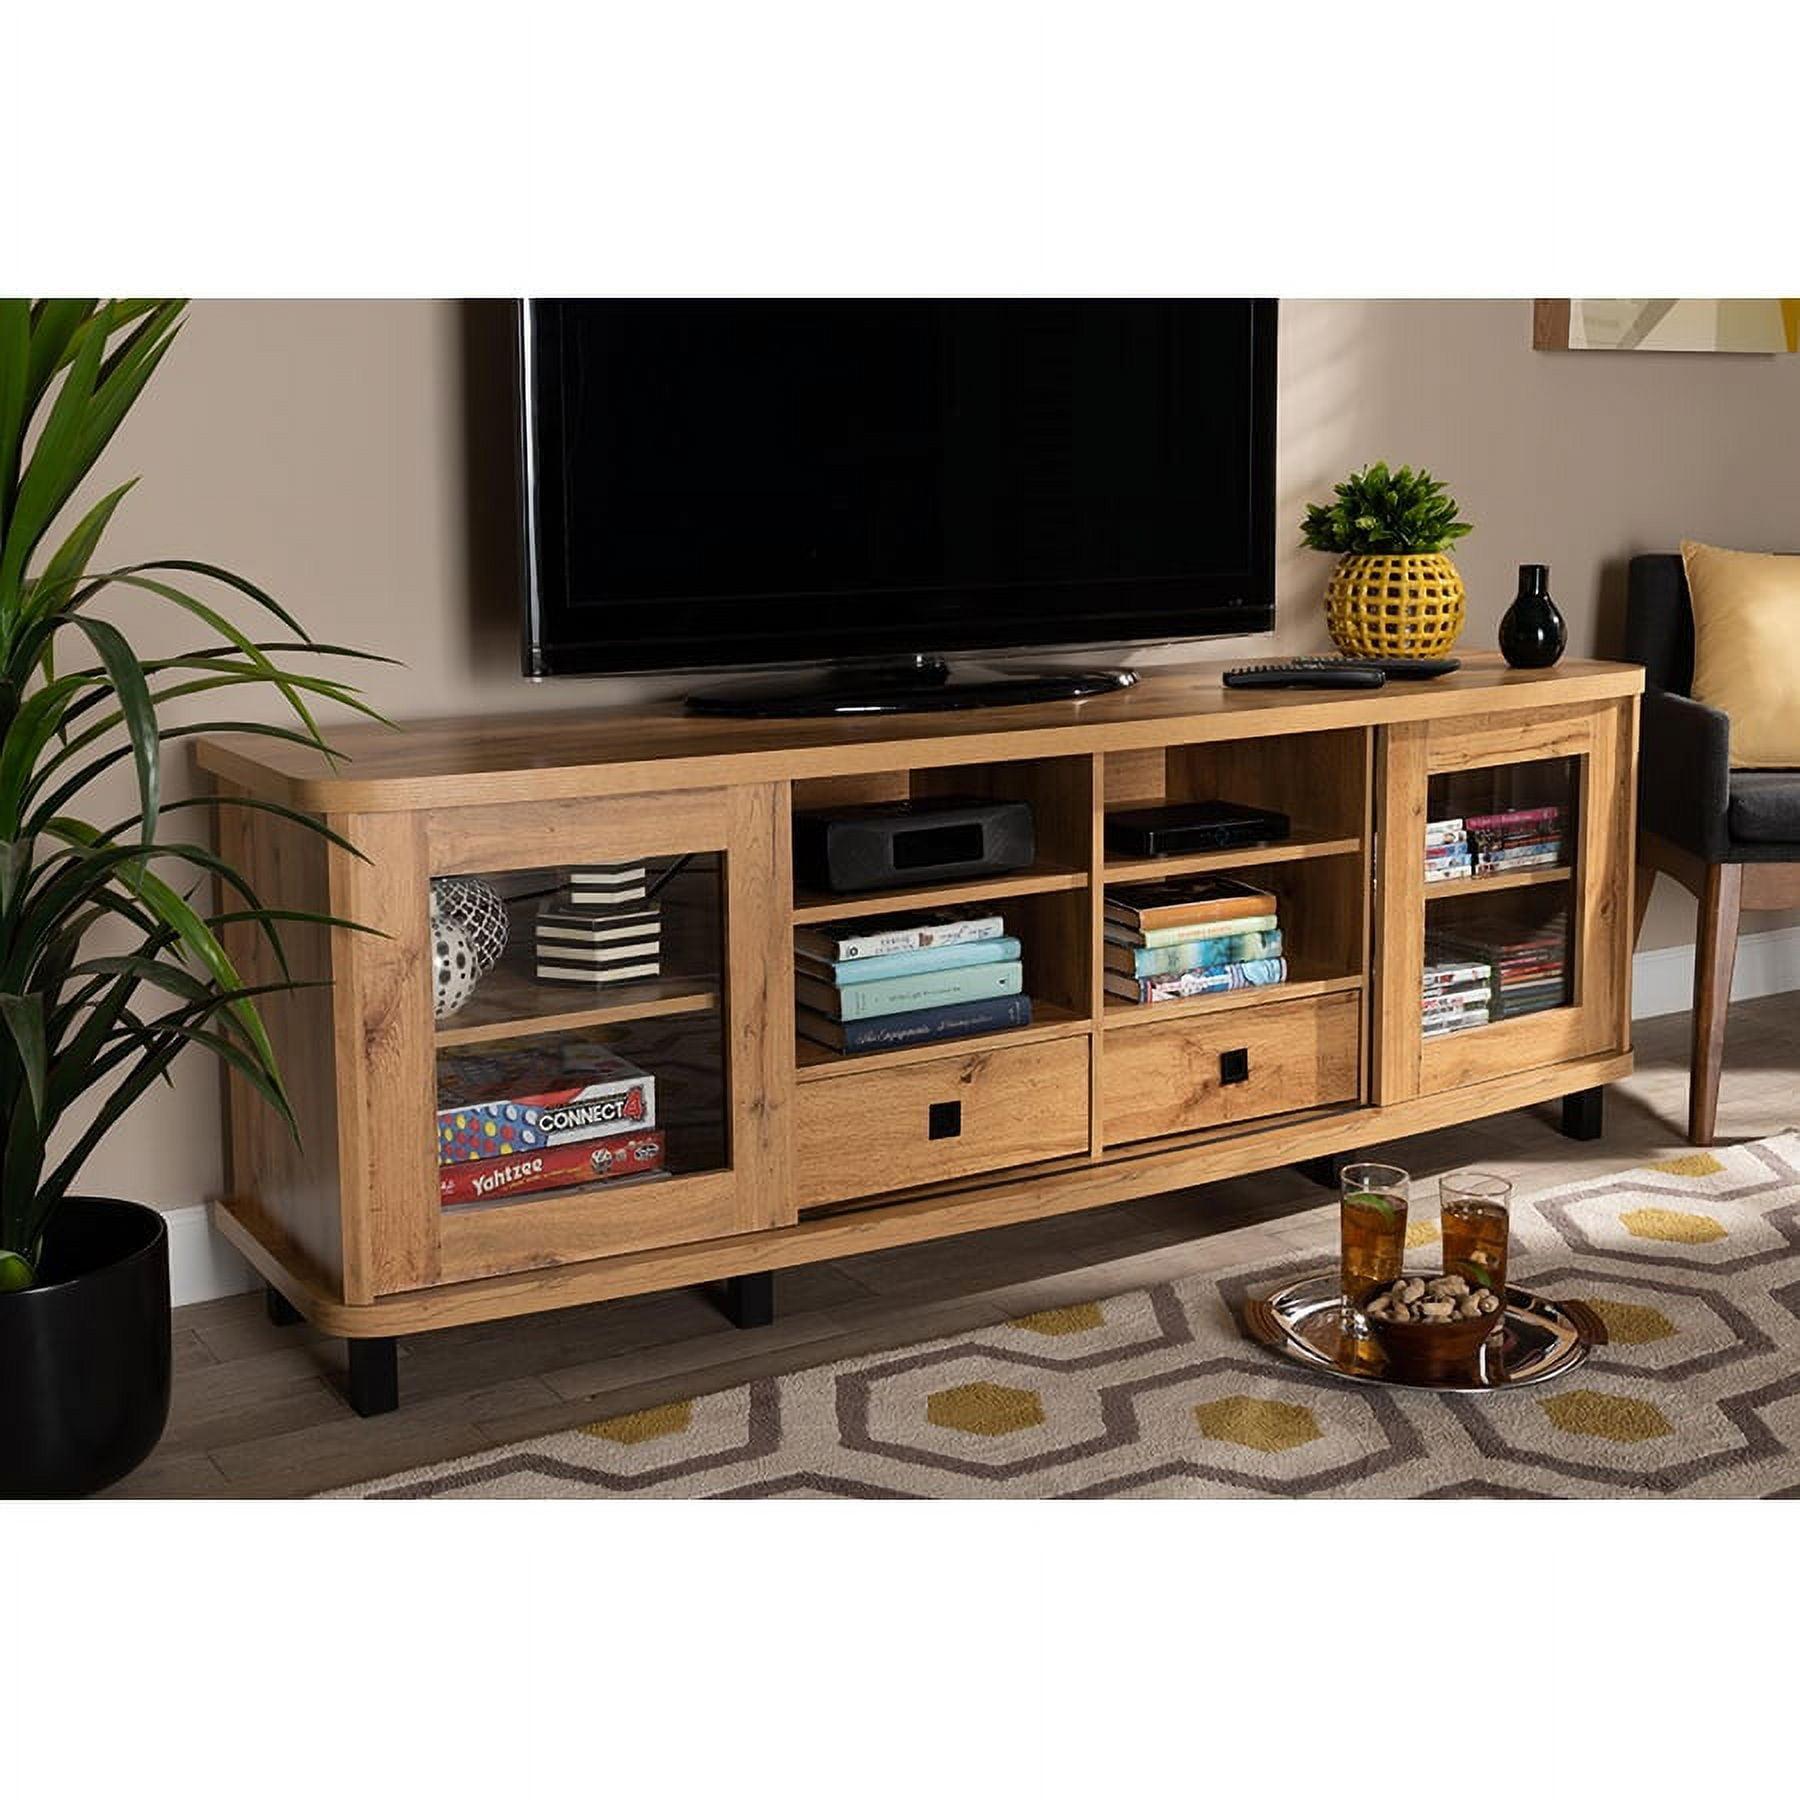 Oak Brown Wood TV Stand with Glass Doors and Drawers